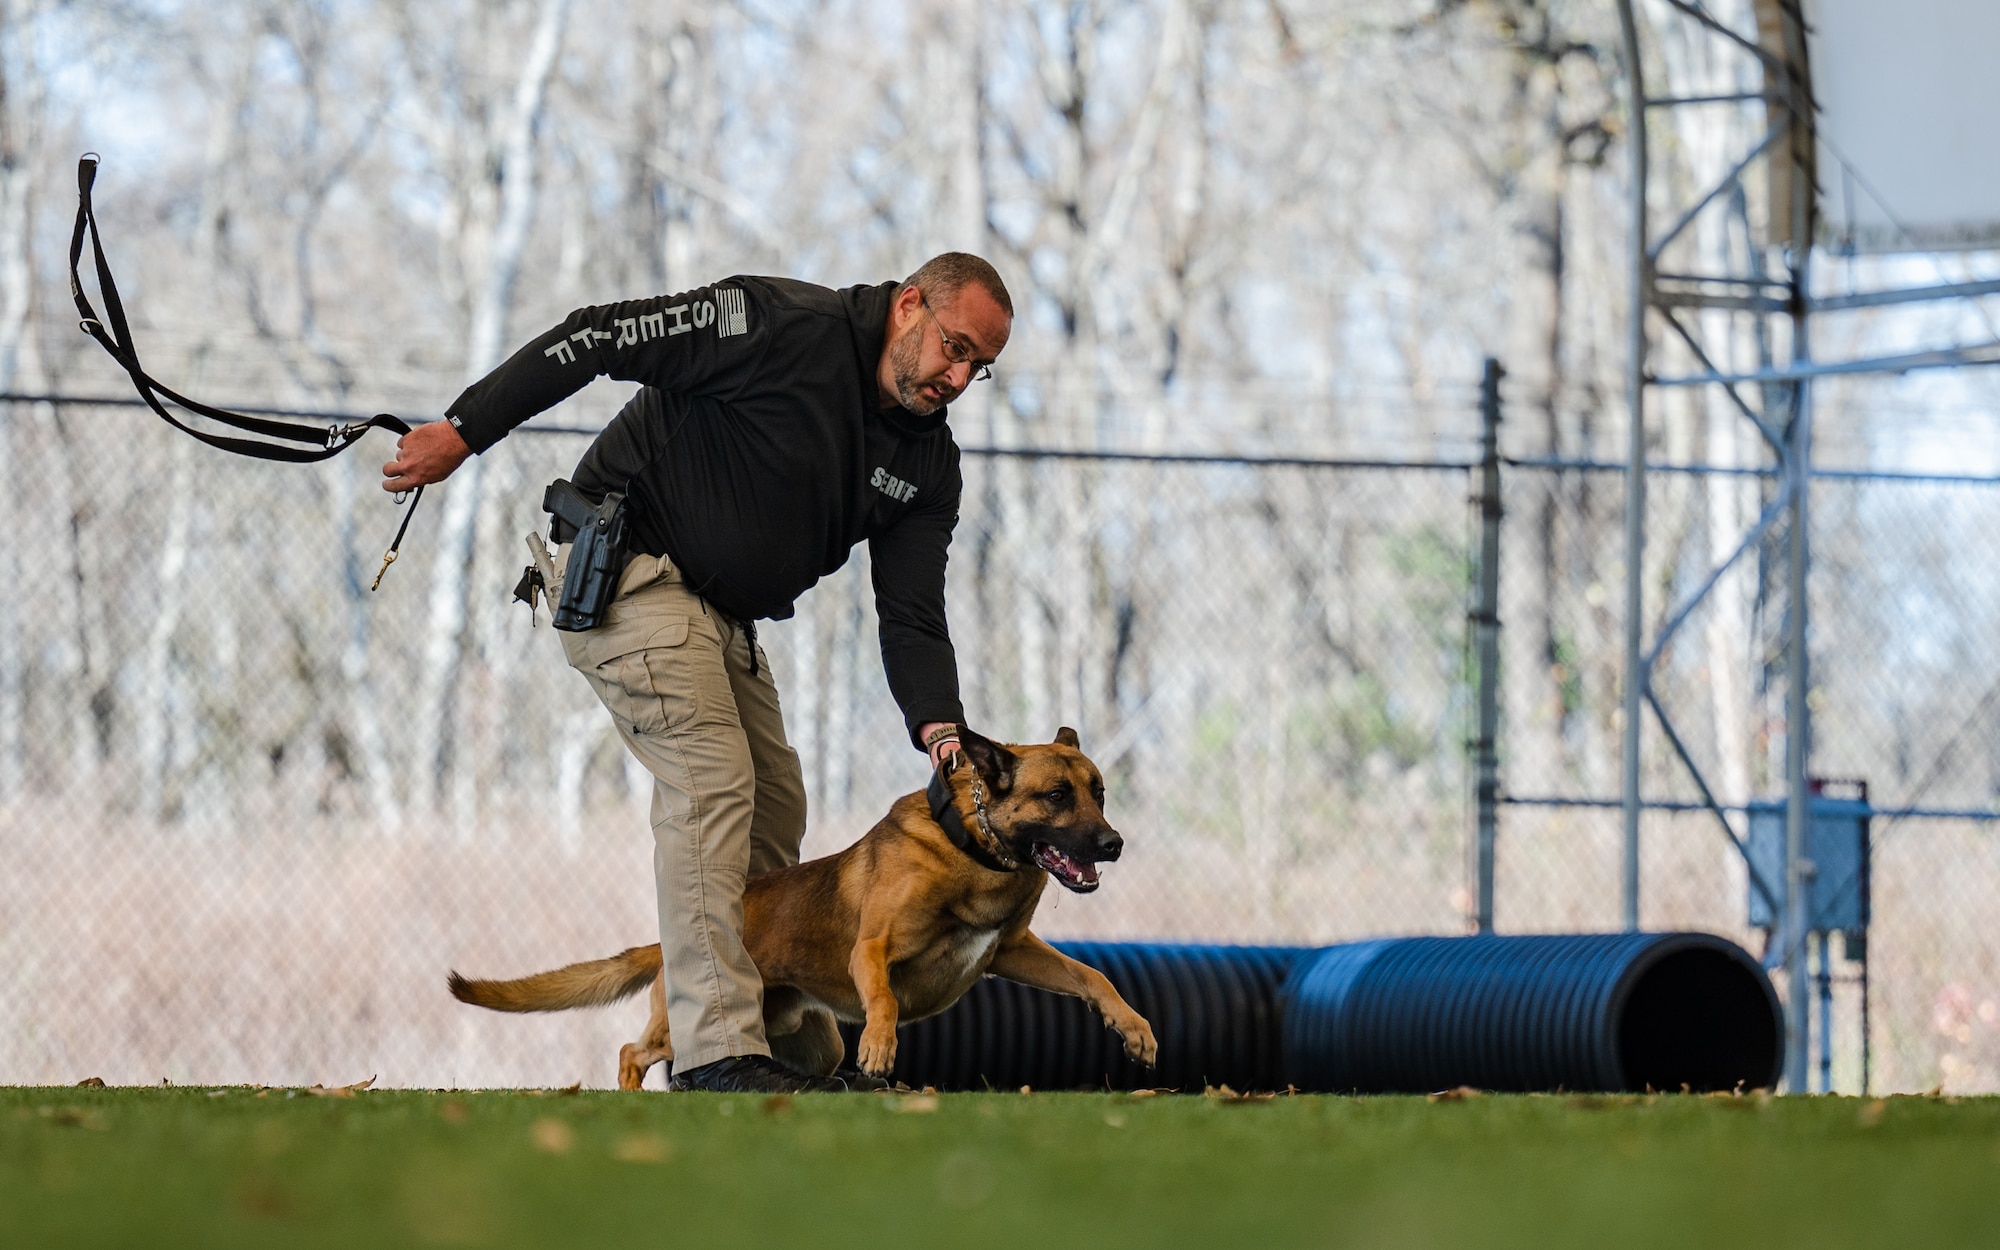 Police dogs are trained to recognize numerous controlled substances, making them a valuable asset to law enforcement agencies.